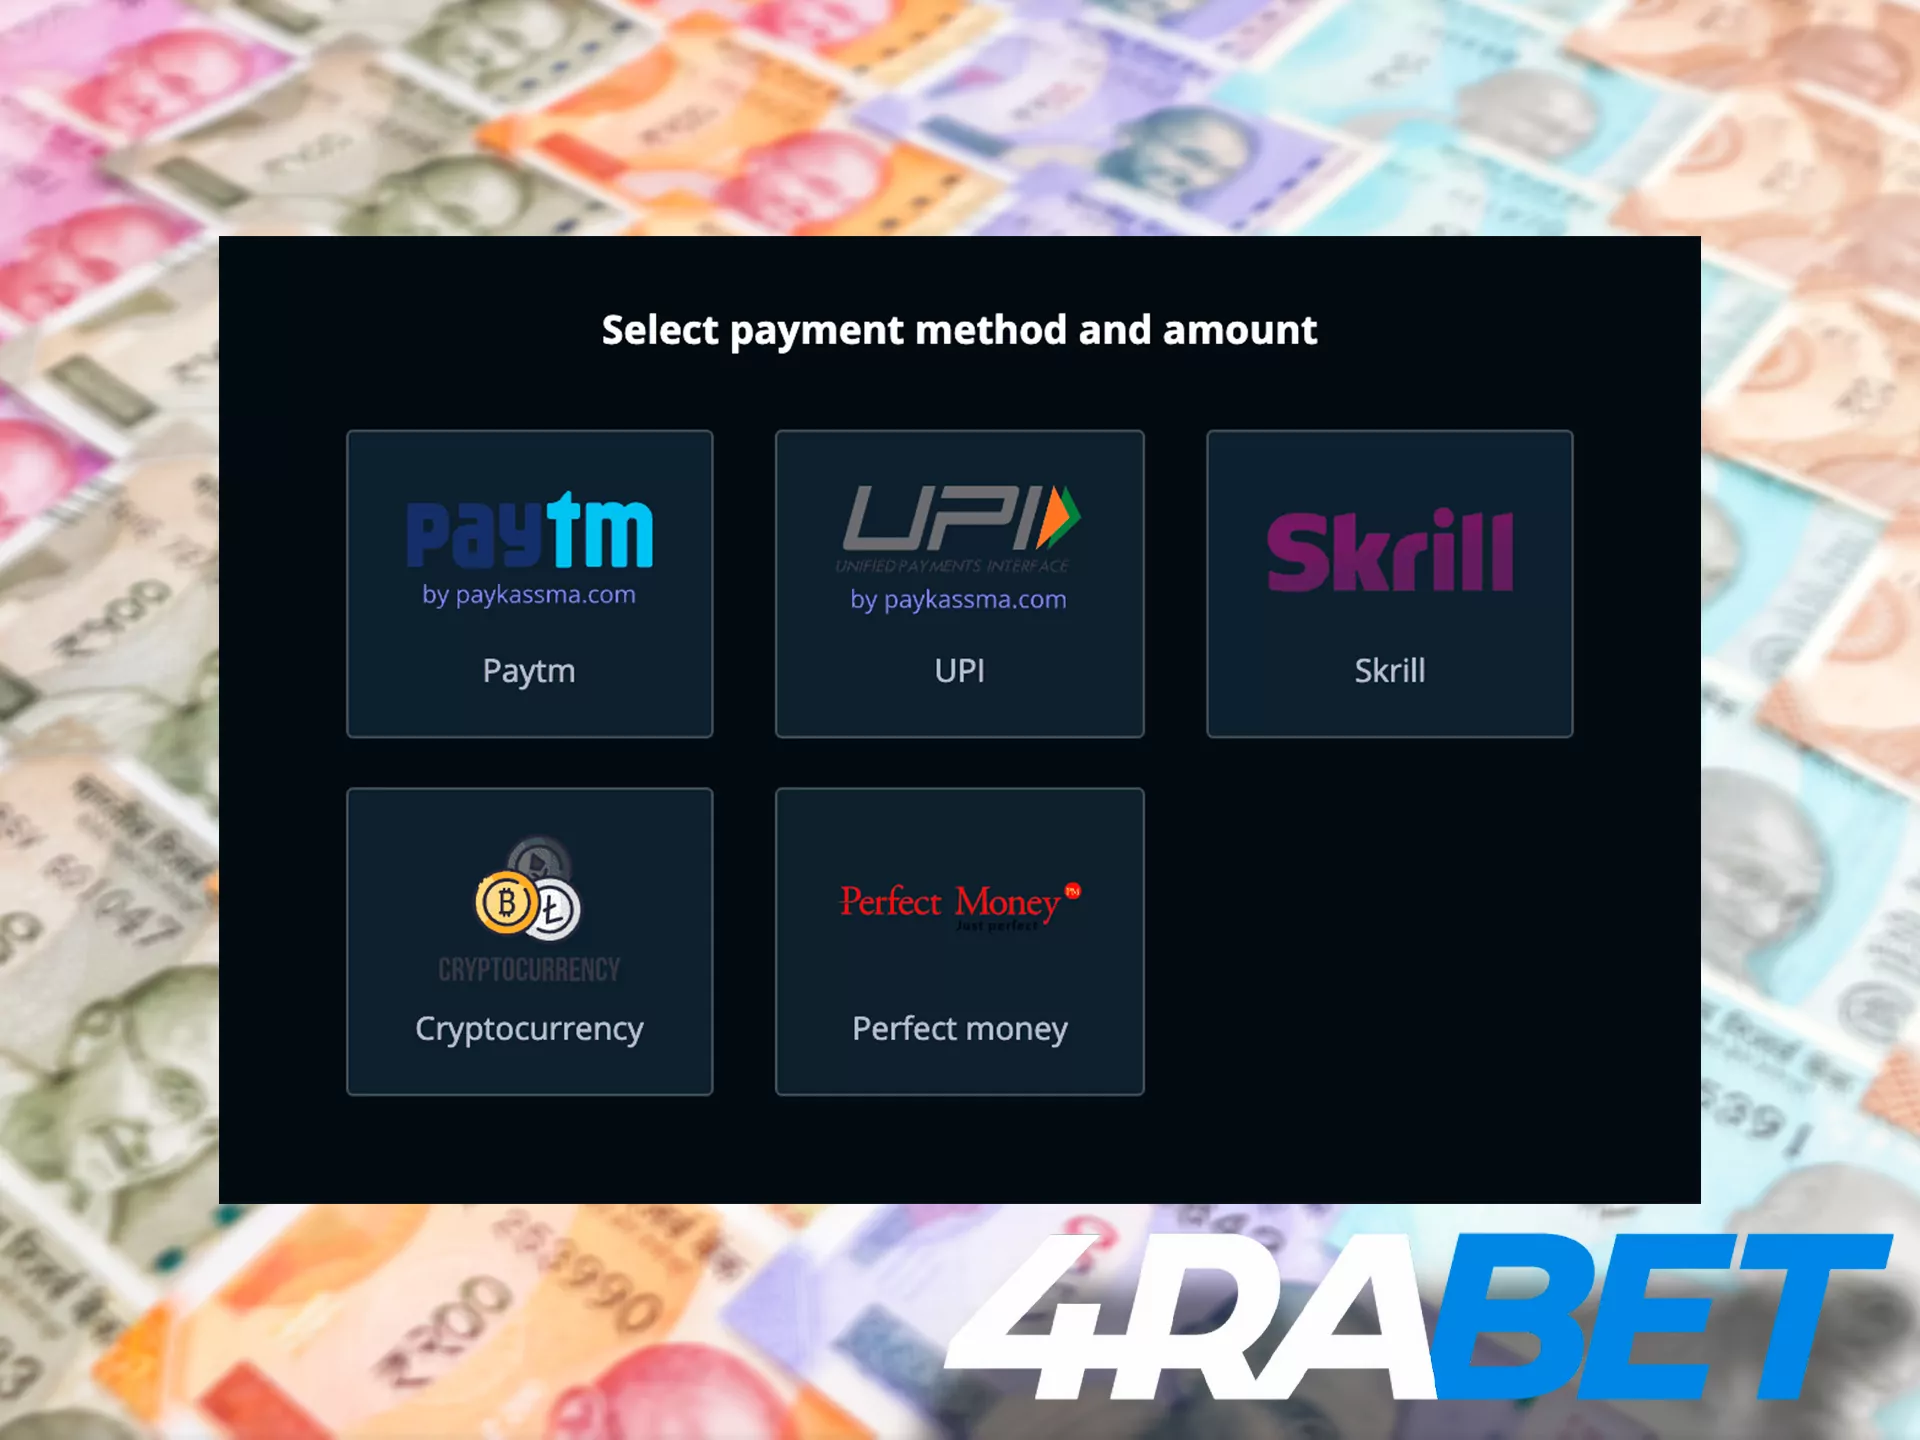 4rabet offers all the popular Indian payment methods to make deposits and withdrawals.